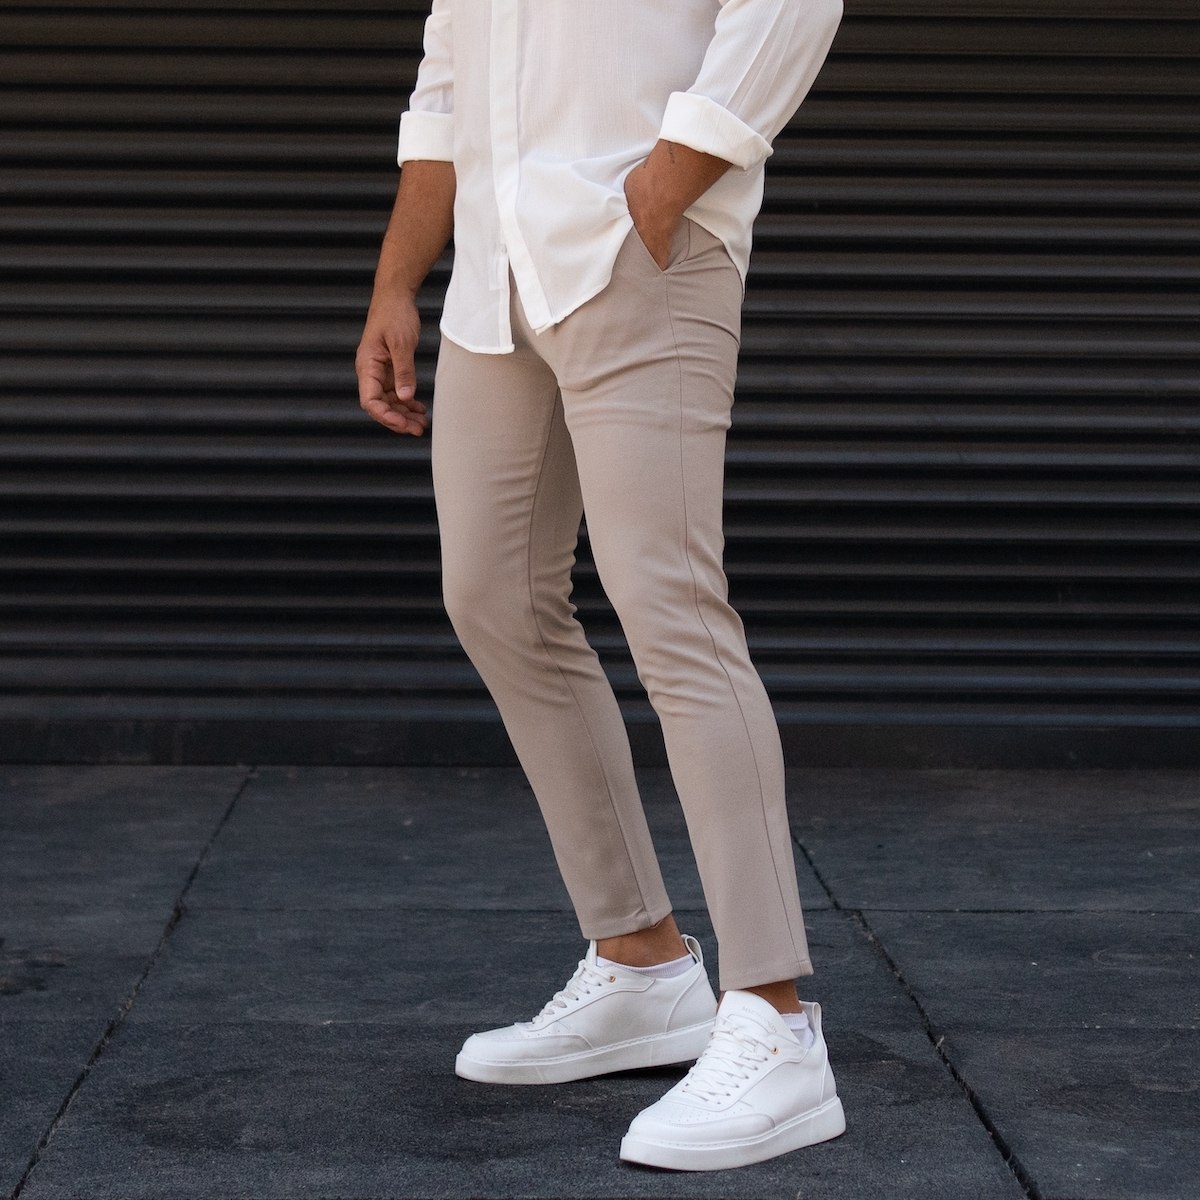 Who made Emma Weymouth's white shirt and beige pants? – OutfitID